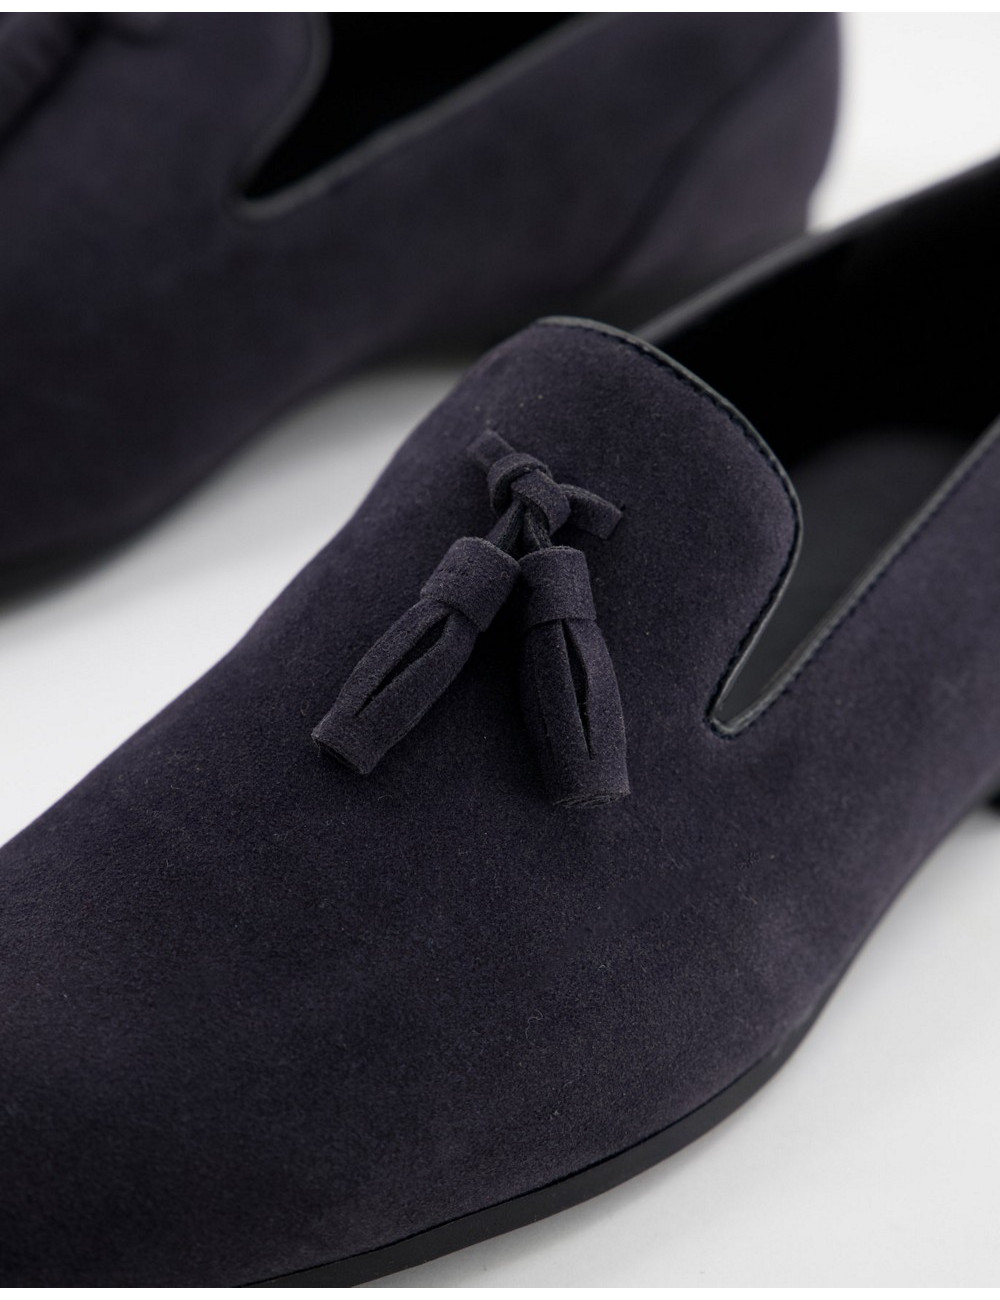 ASOS DESIGN loafers in navy...